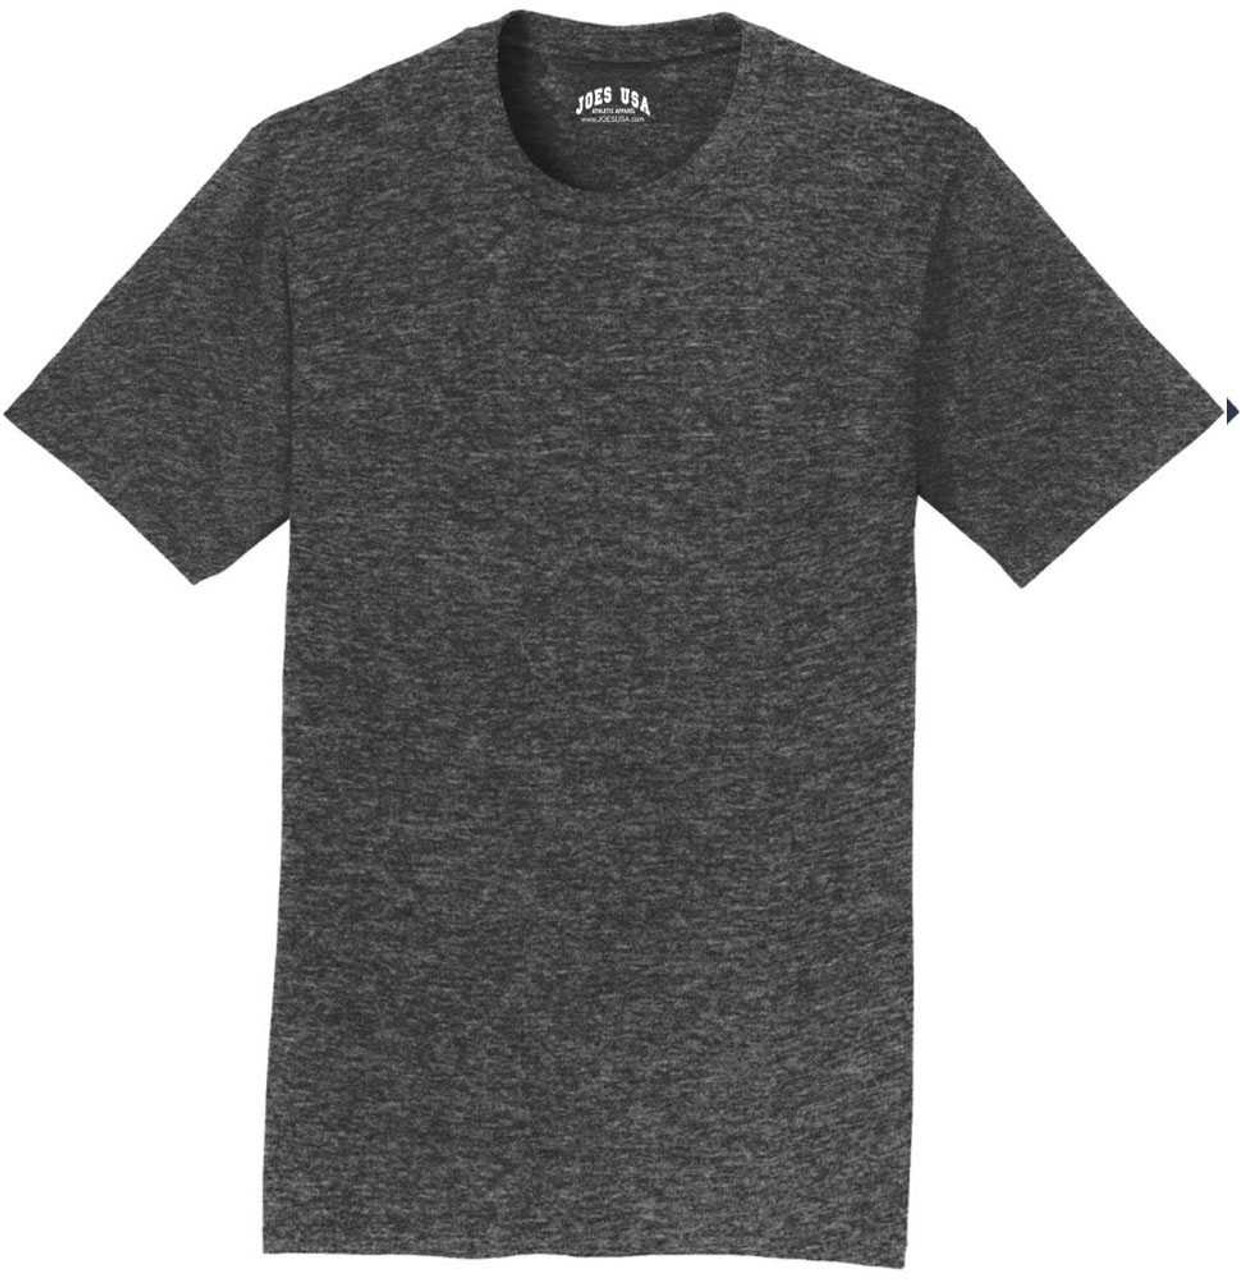 Lucky Brand 100% Cotton Graphic Solid Gray Black Short Sleeve T